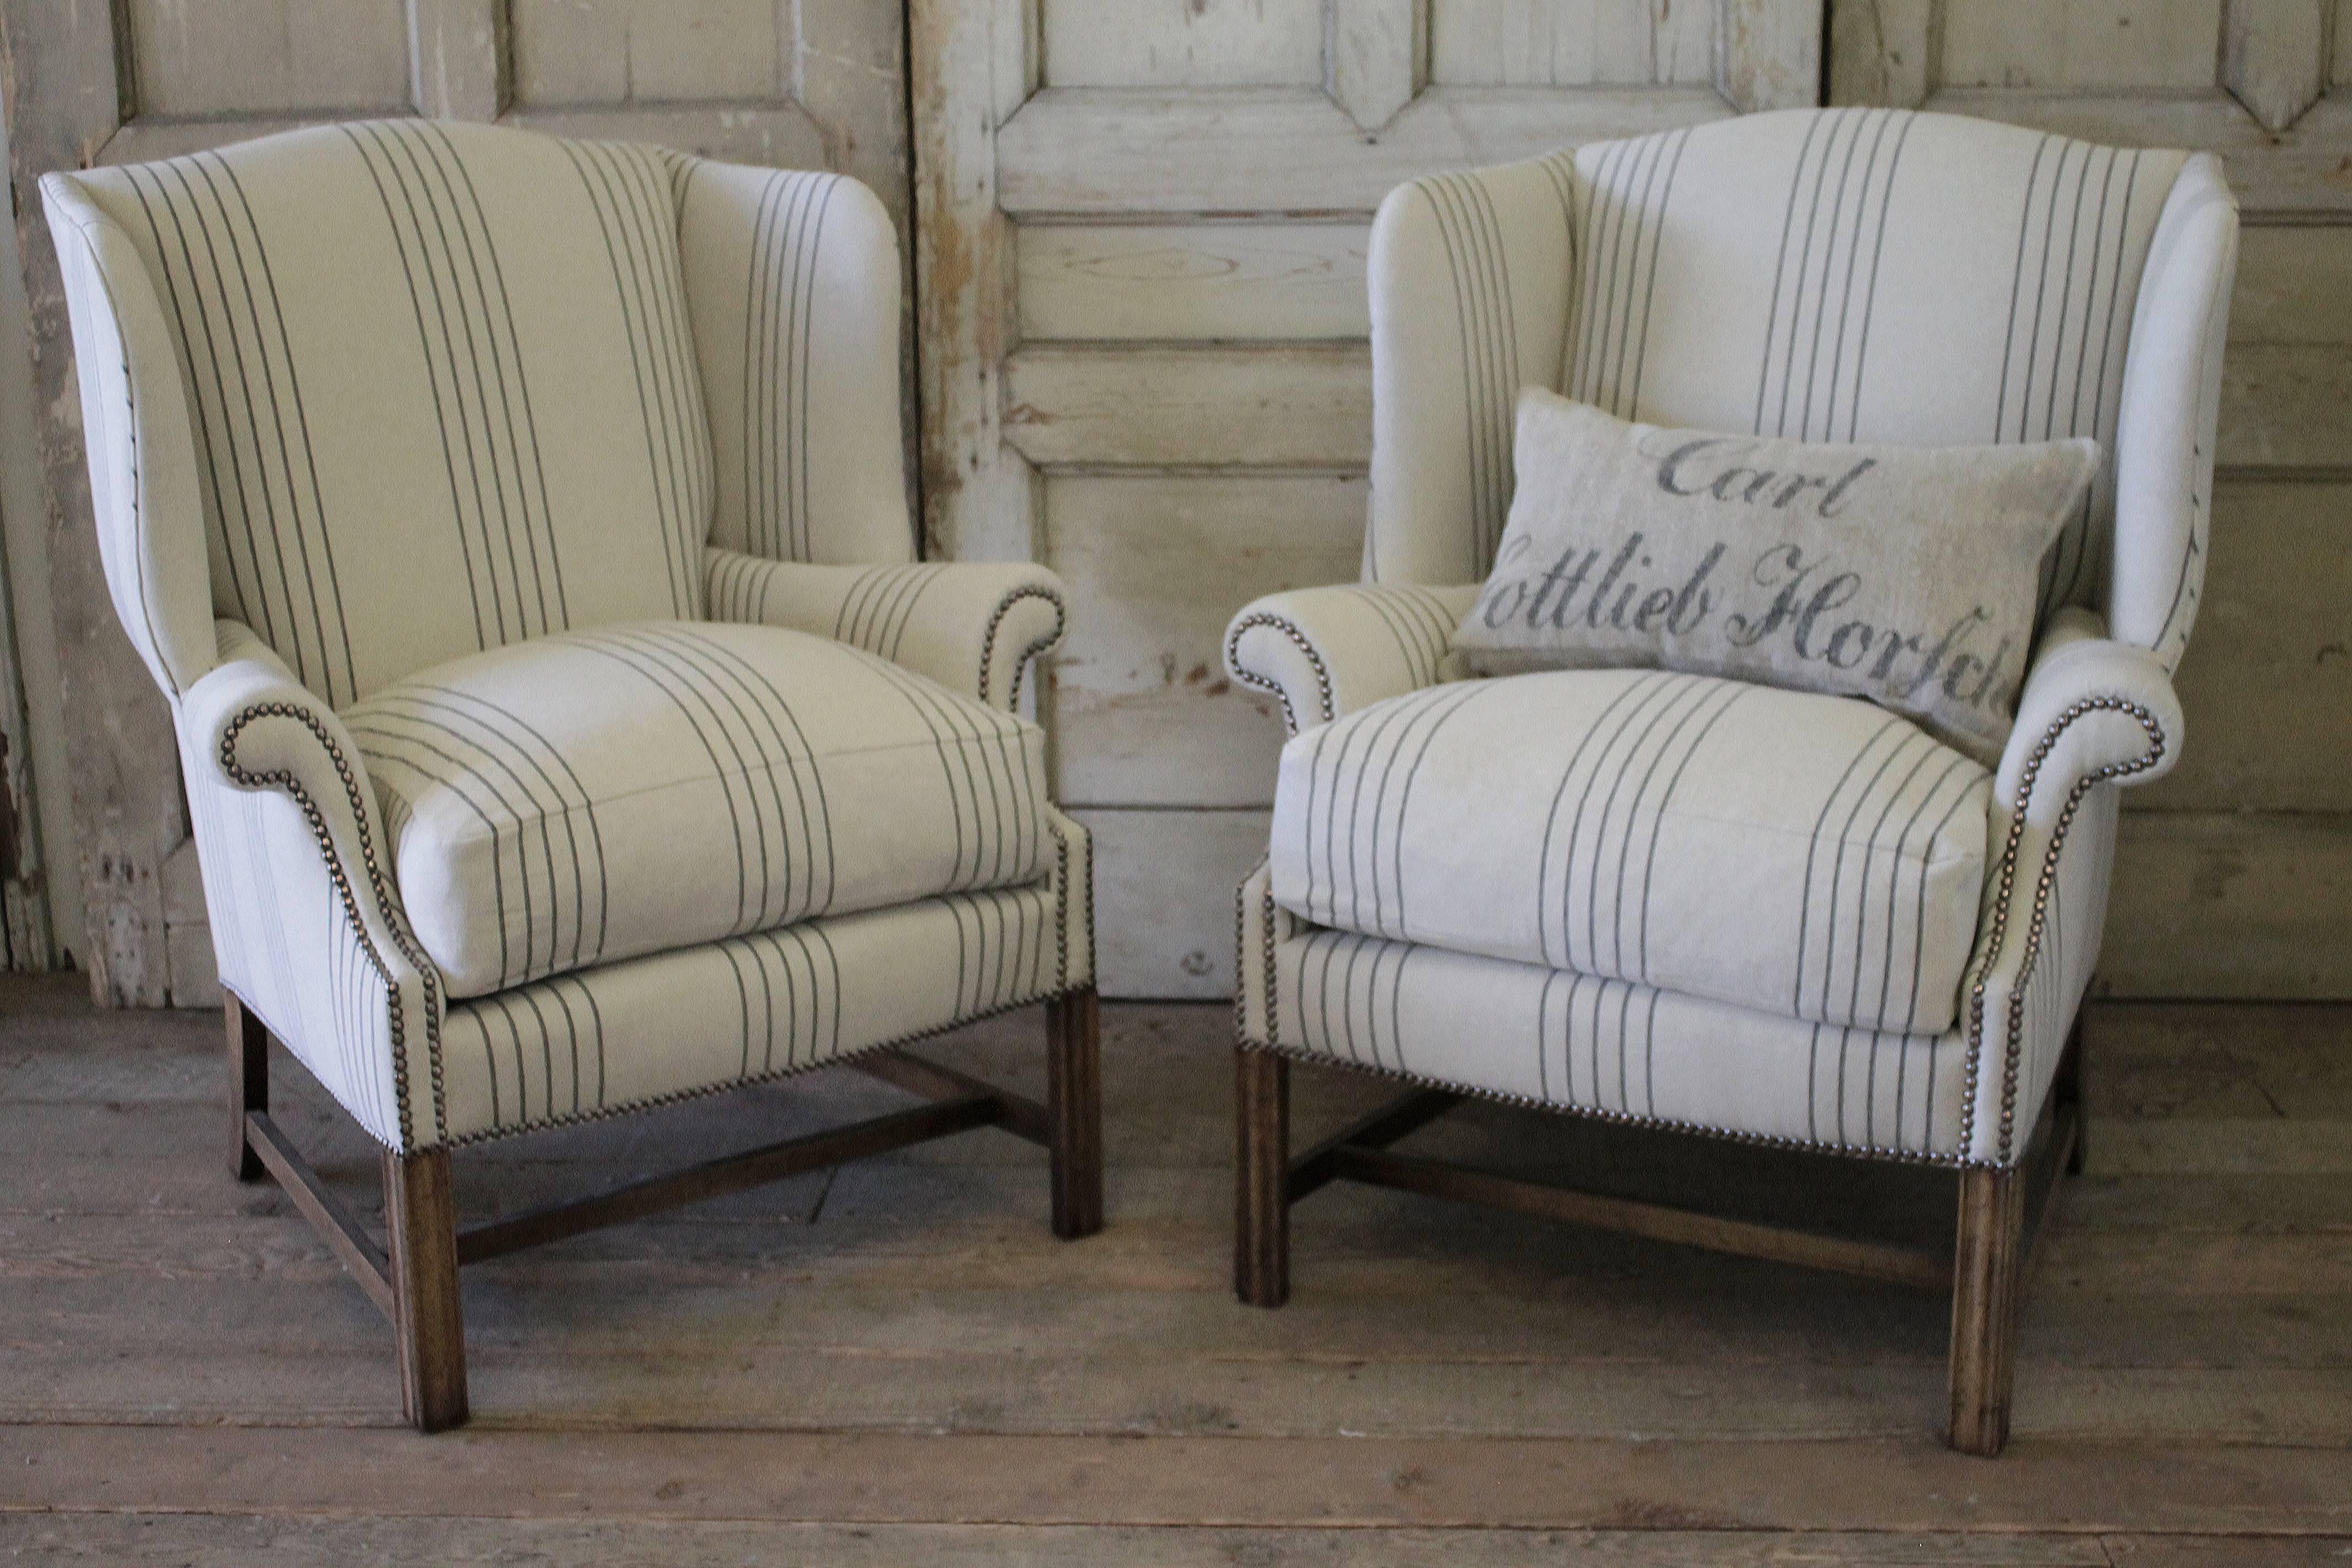 Vintage wing chairs, circa 1960 upholstered in a French Linen we designed. The cushion is a down feather and slip covered. The nailhead trim is antique bronze.
     